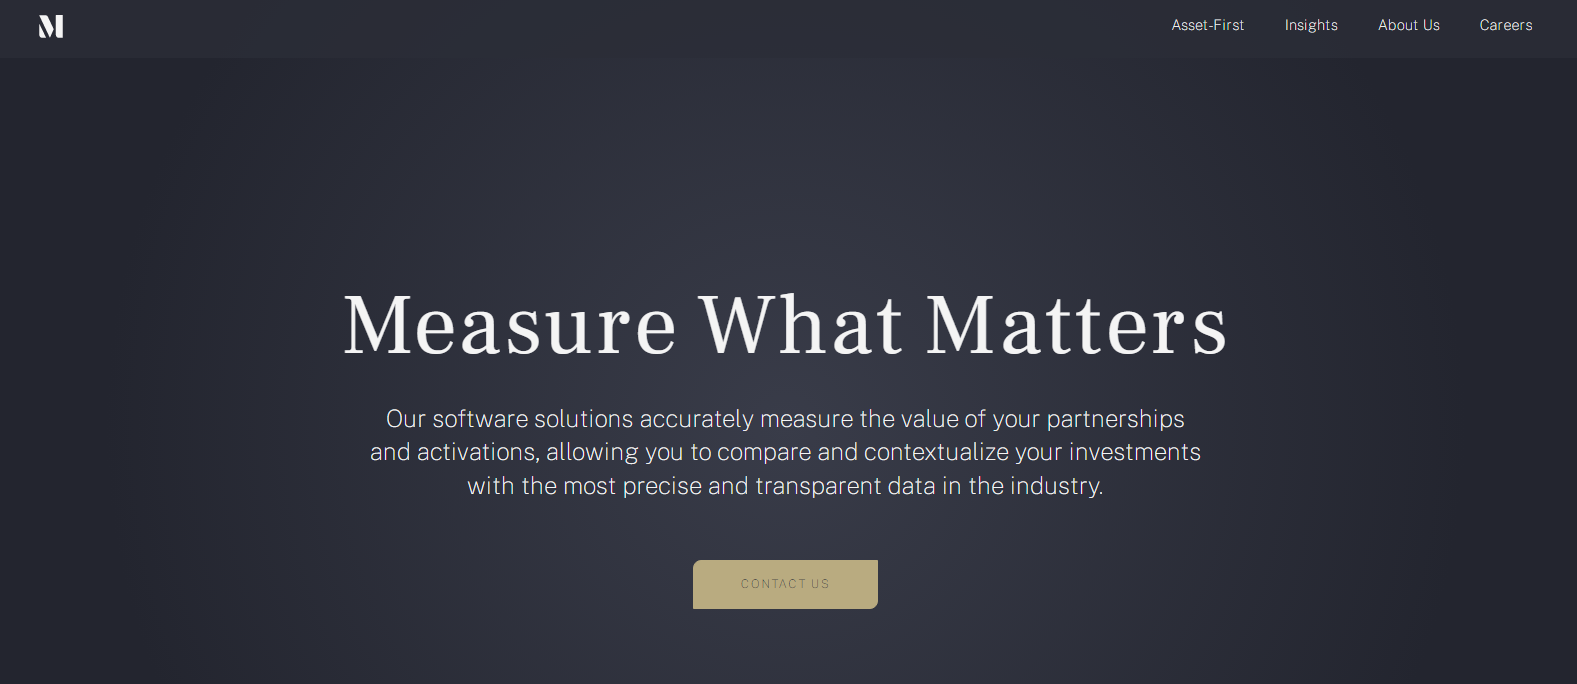 MVP Raises $20 Million in Funding to Revolutionize Measurement and Valuation in the Partnership Industry